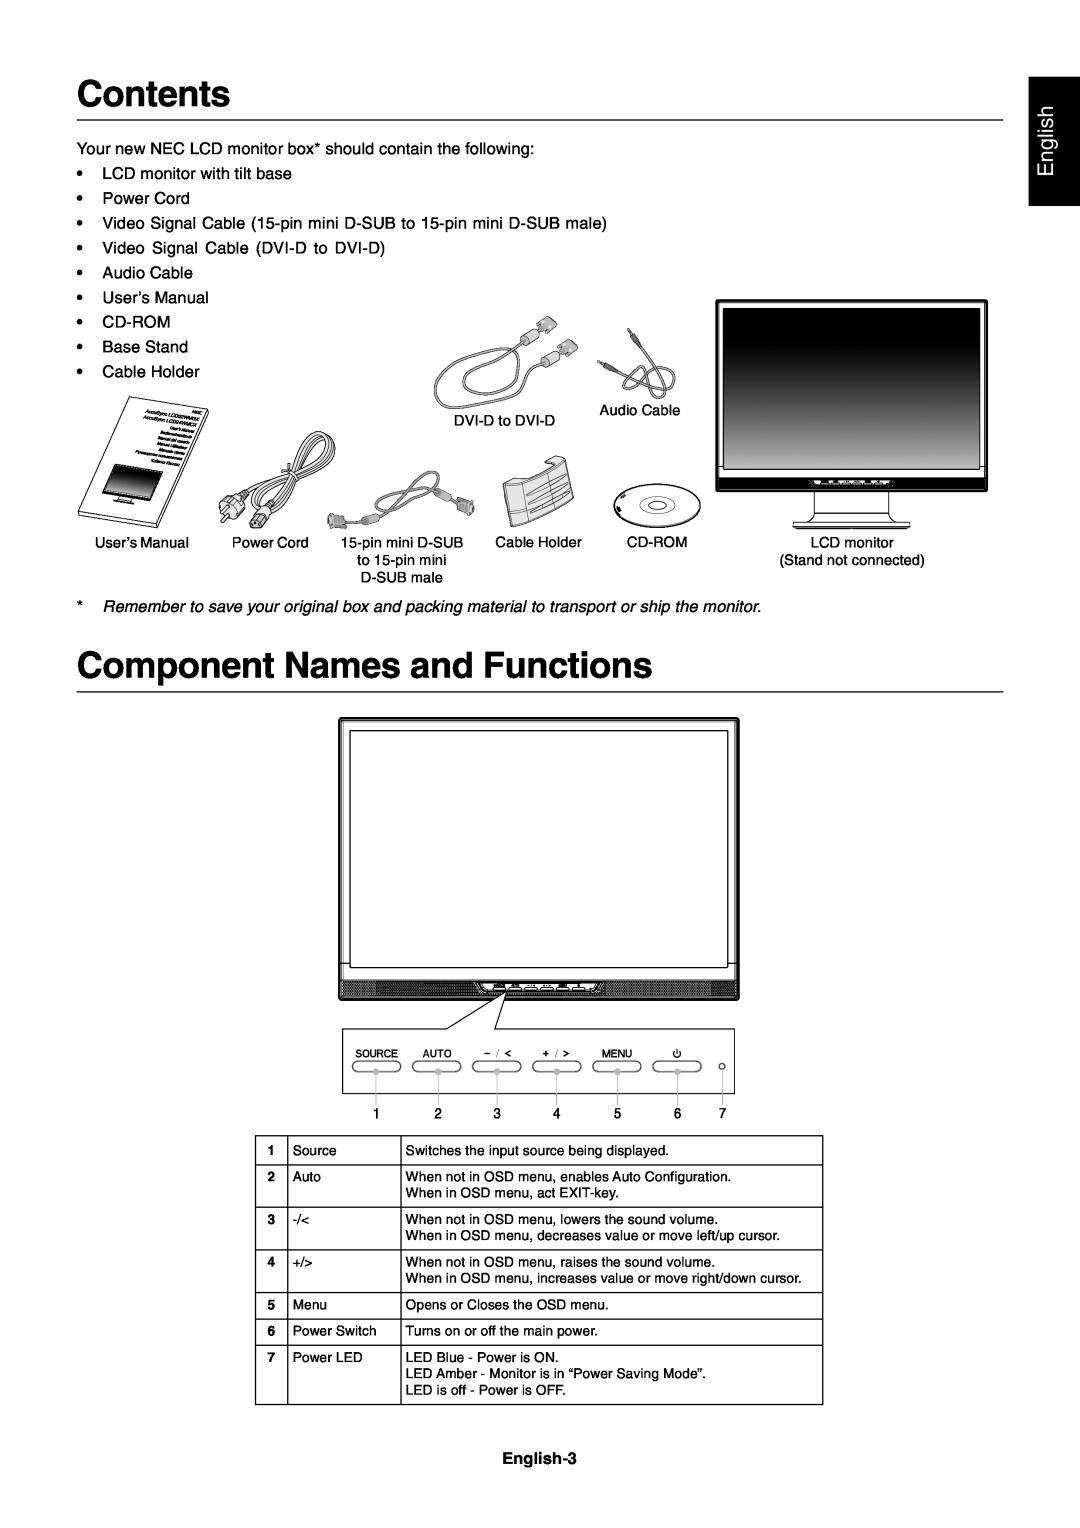 NEC LCD22WMGX Contents, Component Names and Functions, English, Audio Cable DVI-D to DVI-D, UserÕs Manual, Power Cord 